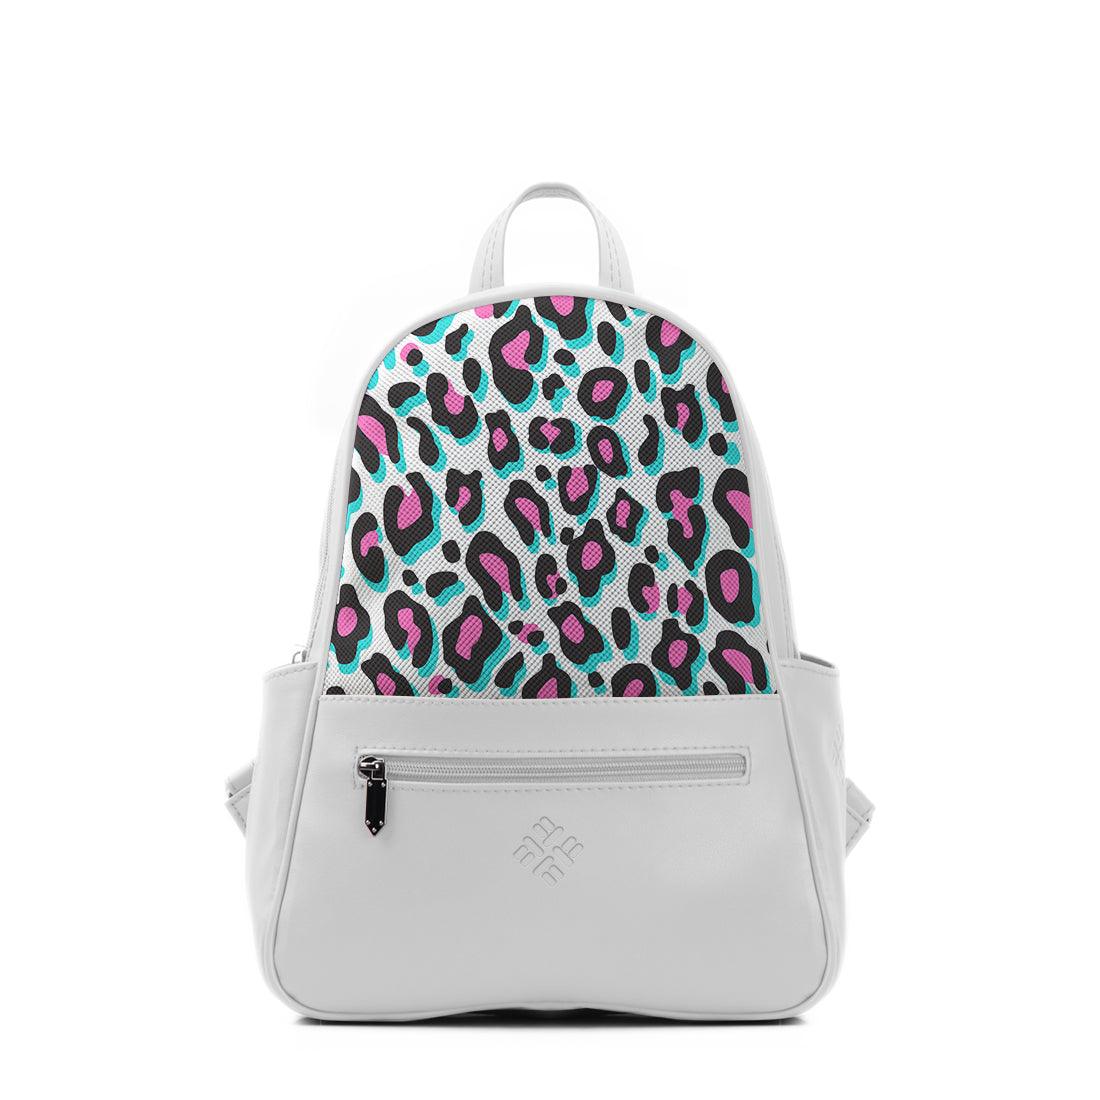 White Vivid Backpack Purple Abstract